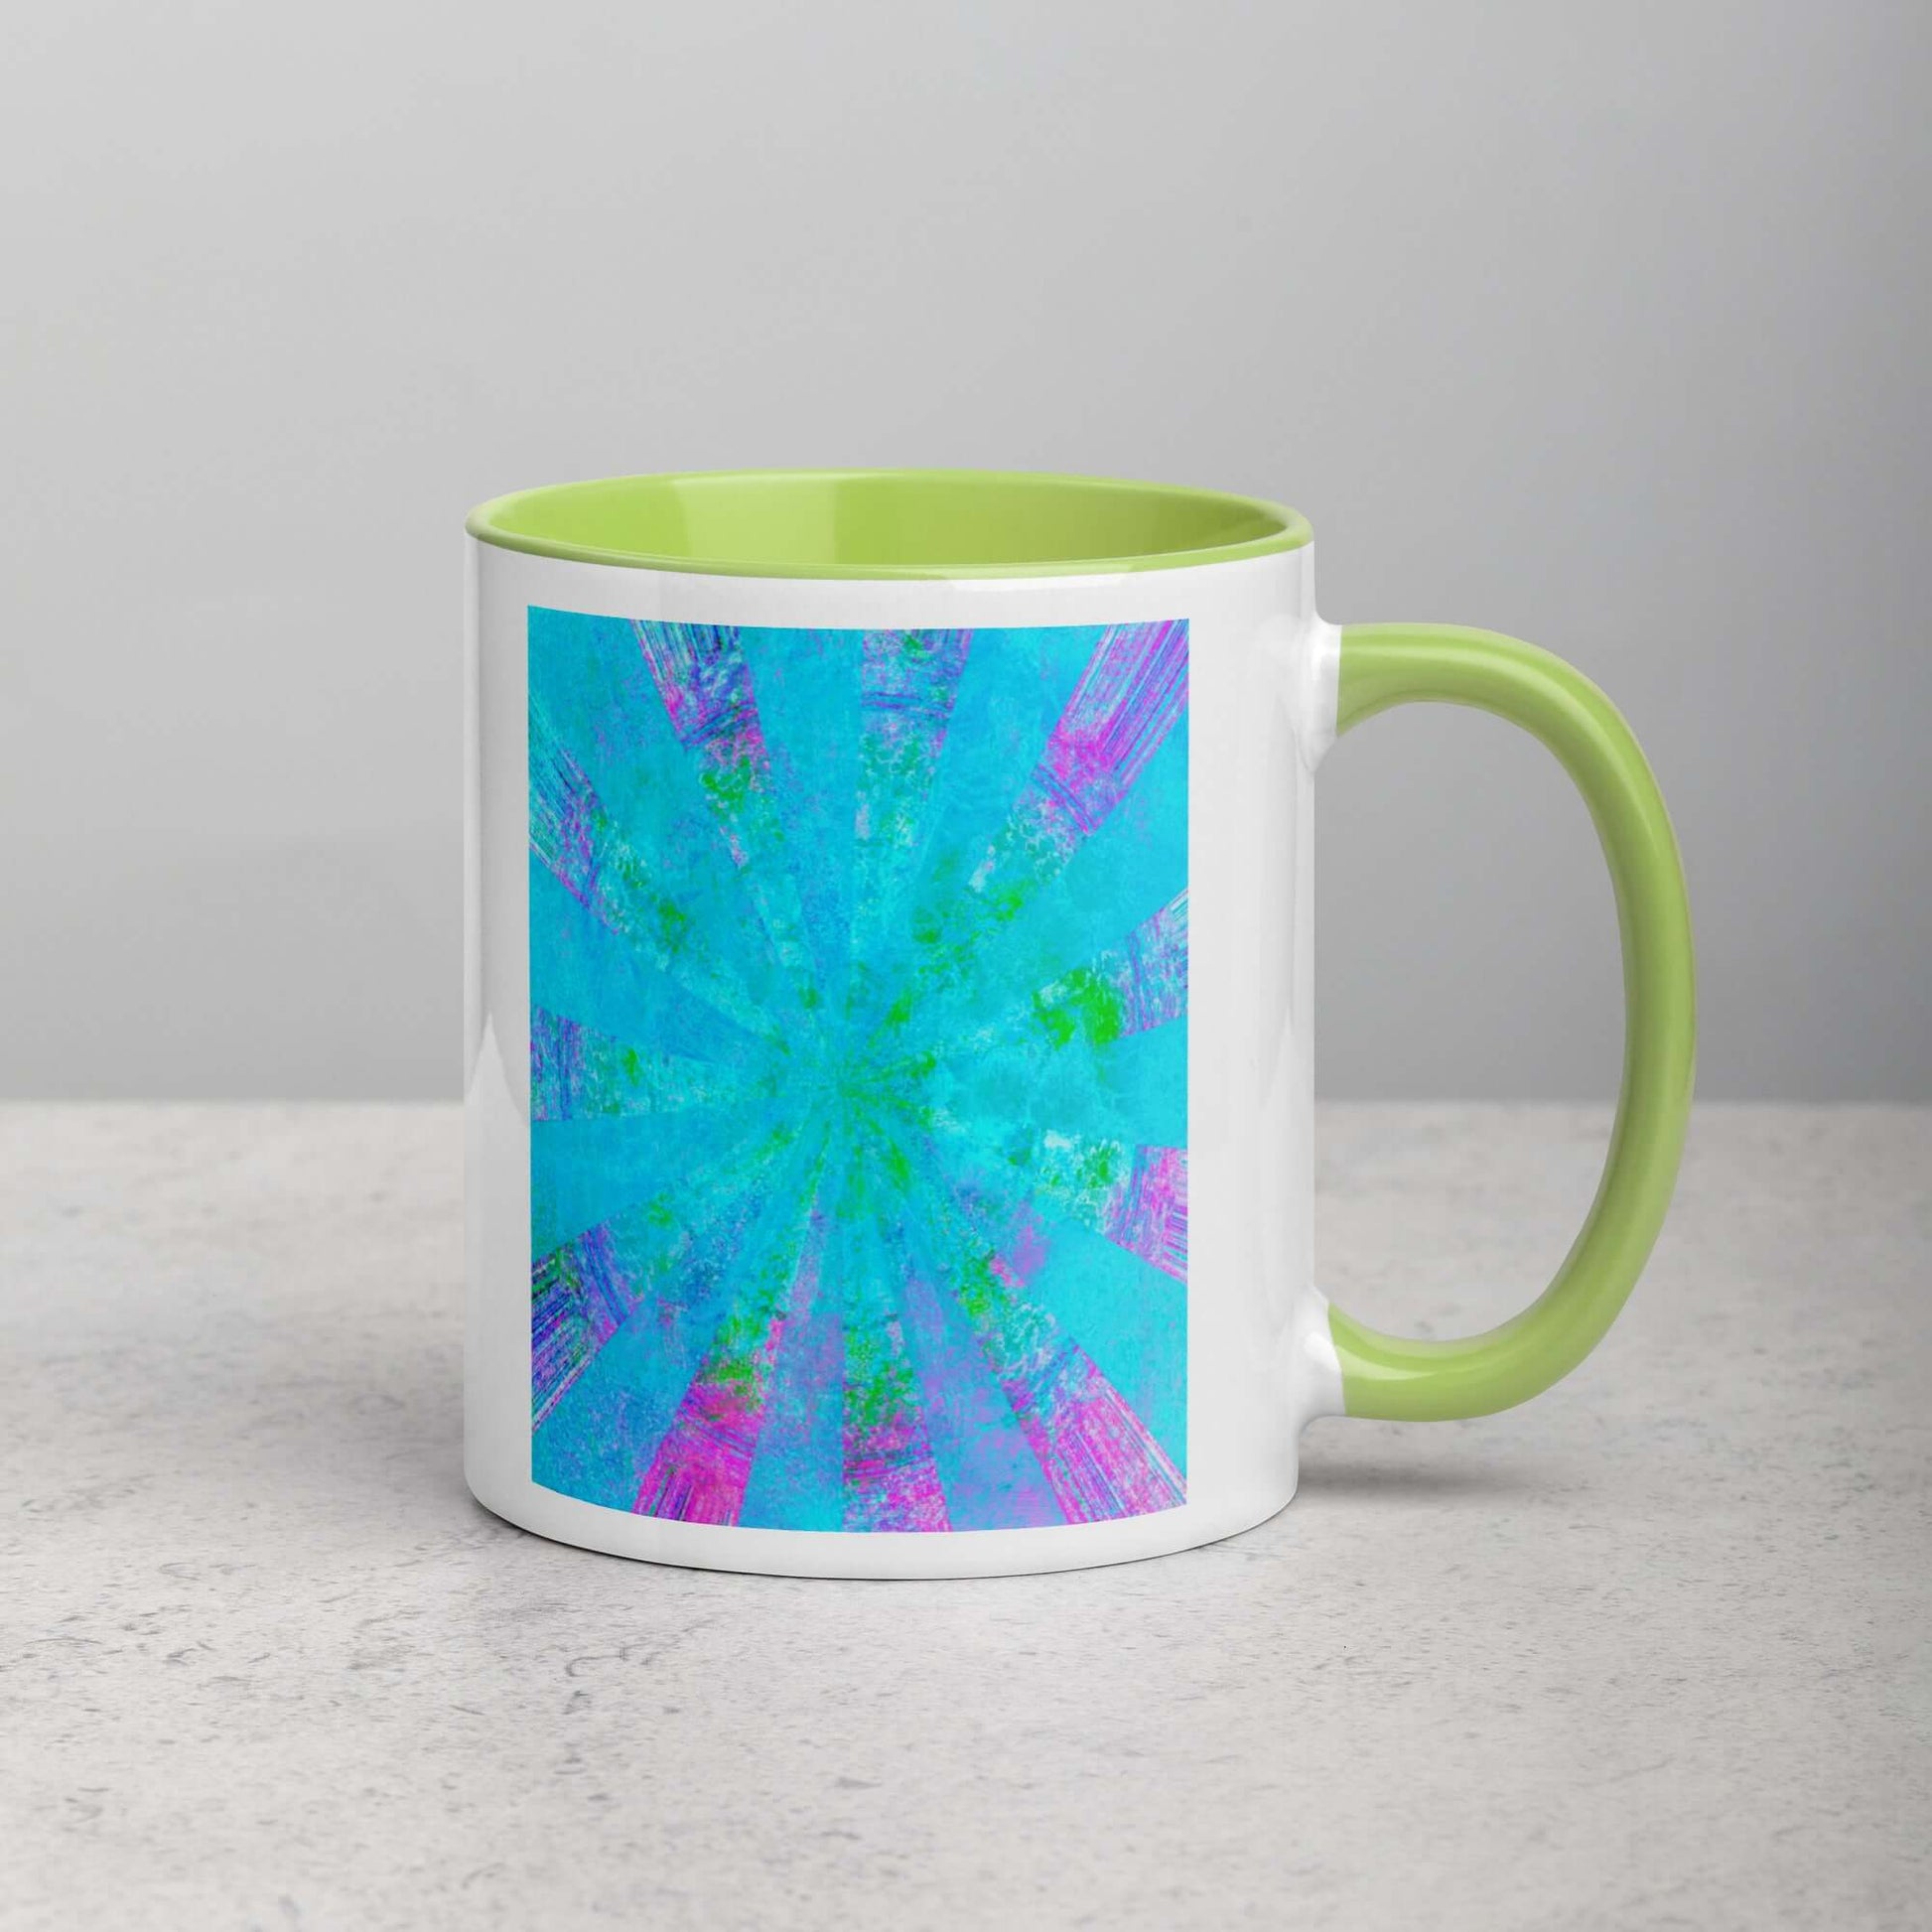 Turquoise Blue with Purple Radial “Blue Stingray” Abstract Art Mug with LimeGreen Color Inside Right Handed Front View